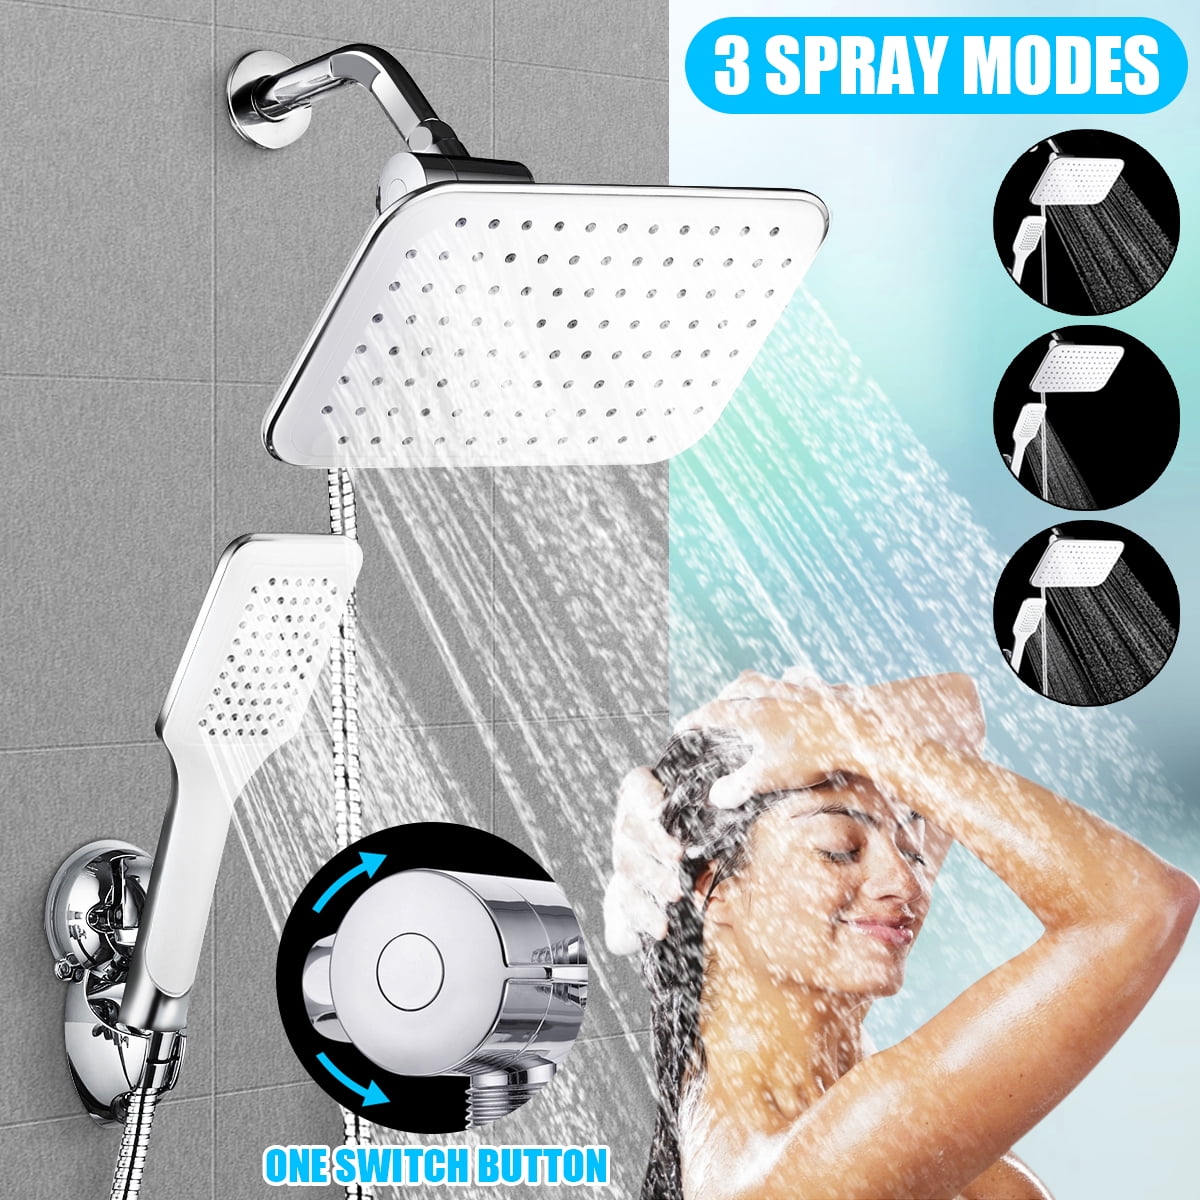 40% Water Saving Baban High Pressure Shower Head Set Handheld Filtration Shower Head Softens Hard Water an Extra Pack of Filter Beads 3 Shower Modes+Water Stop Mode with Shower Hose and Bracket 